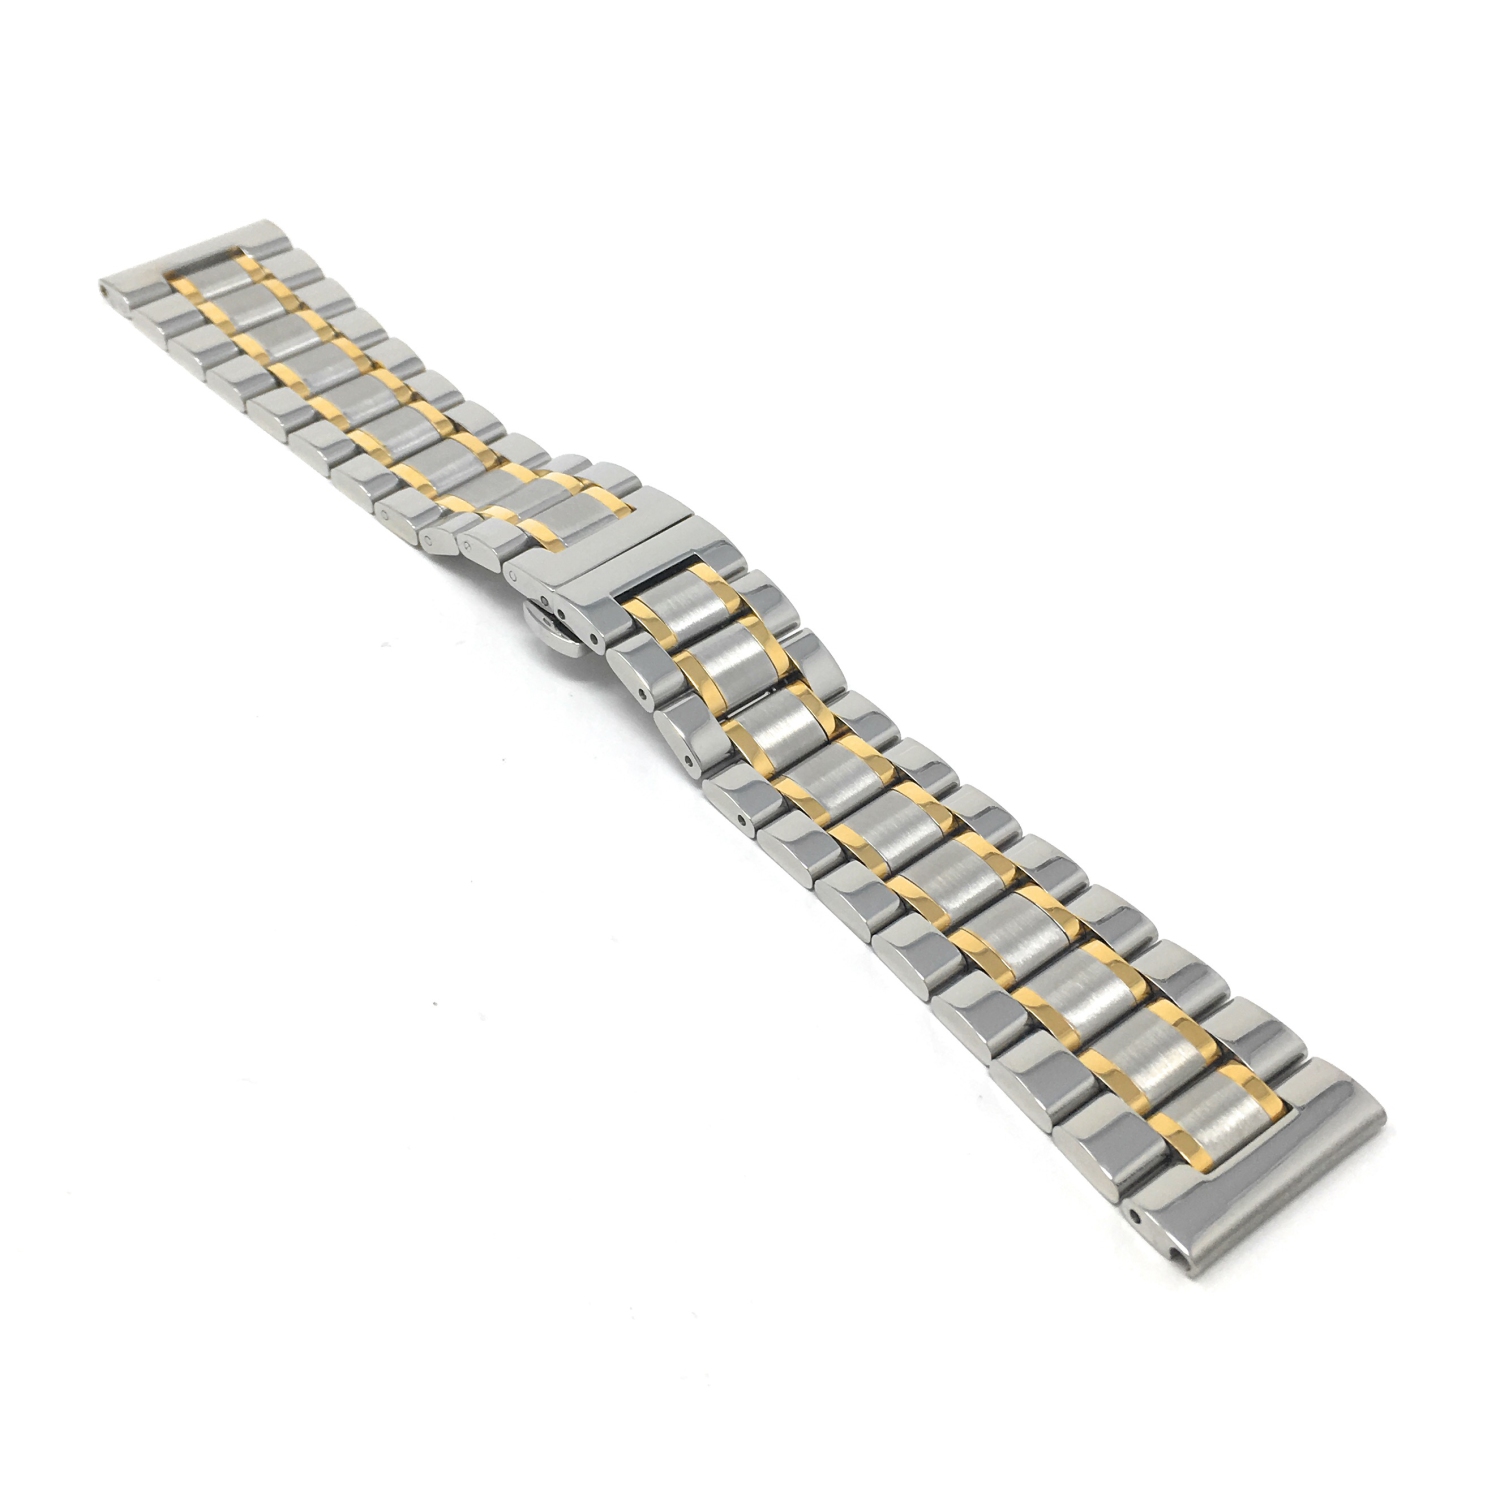 Bandini Stainless Steel Smart Watch Band Strap, Removable Links For Mobvoi Ticwatch E2, S2, Pro, Pro 3 - 22mm, Silver / Gold